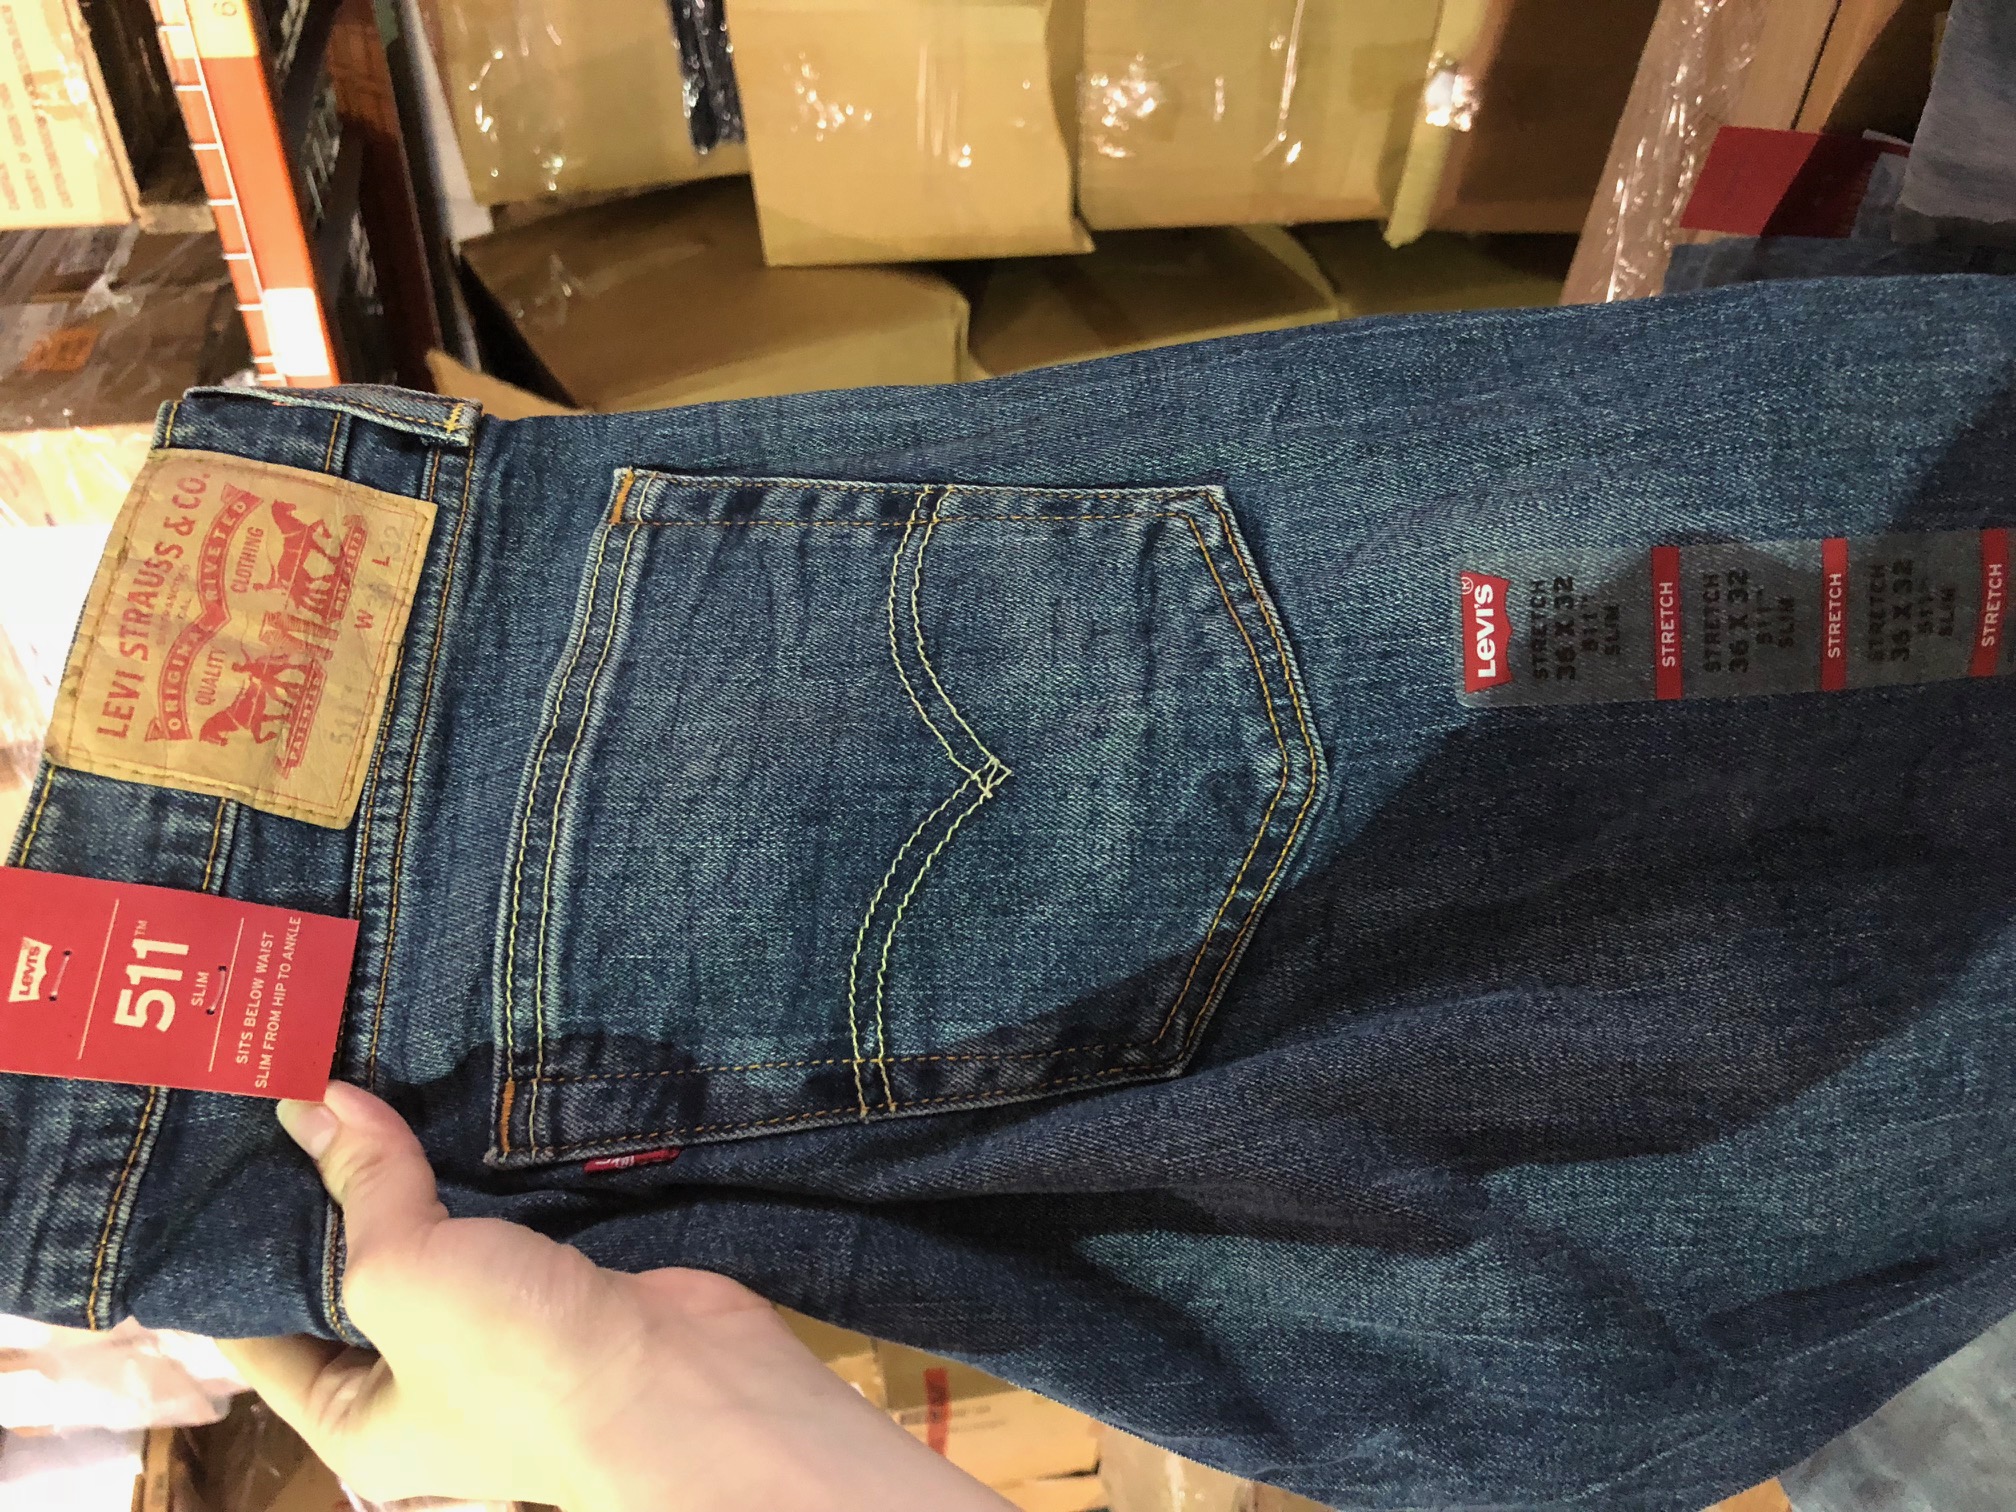 IRREGULAR LEVI'S INCLUDED JACKETS AND ACCESSORIES USA